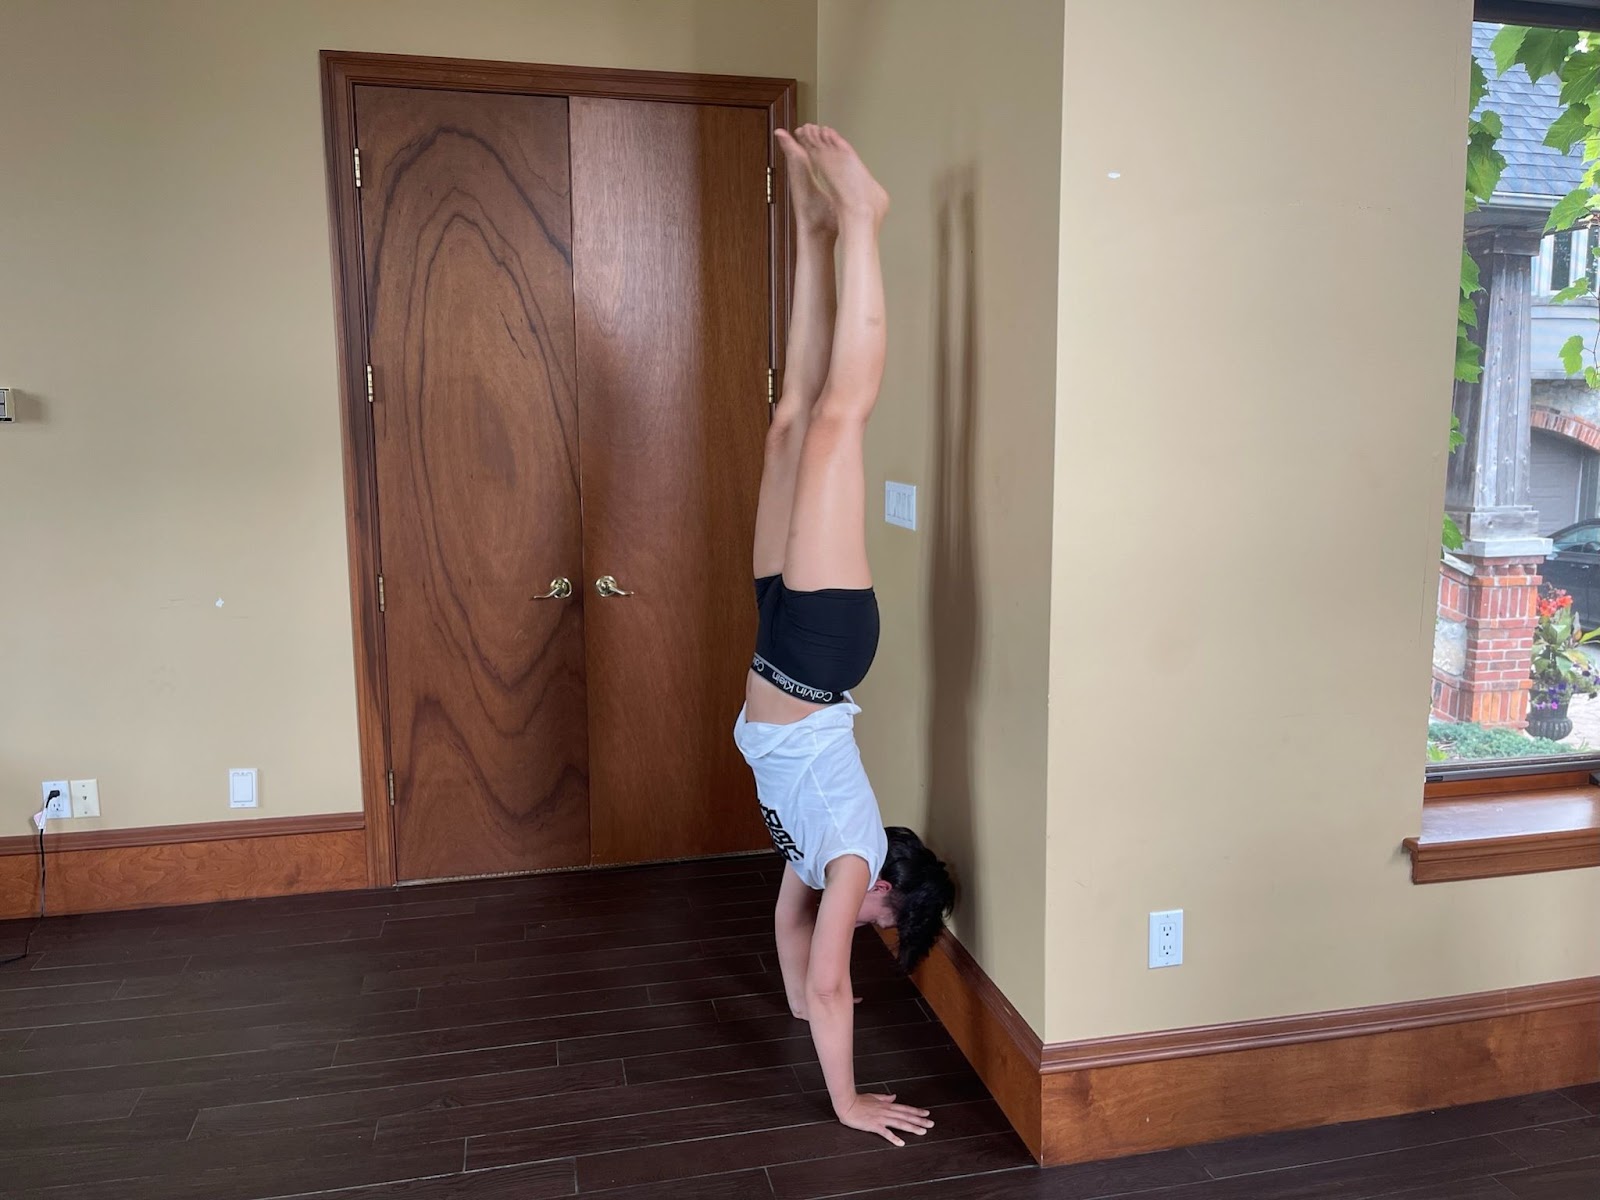 Tarzan does a handstand very near to a wall, her plain white tshirt exposes the ads she worked very hard to get, and she wears black calvin klein men's boxers.